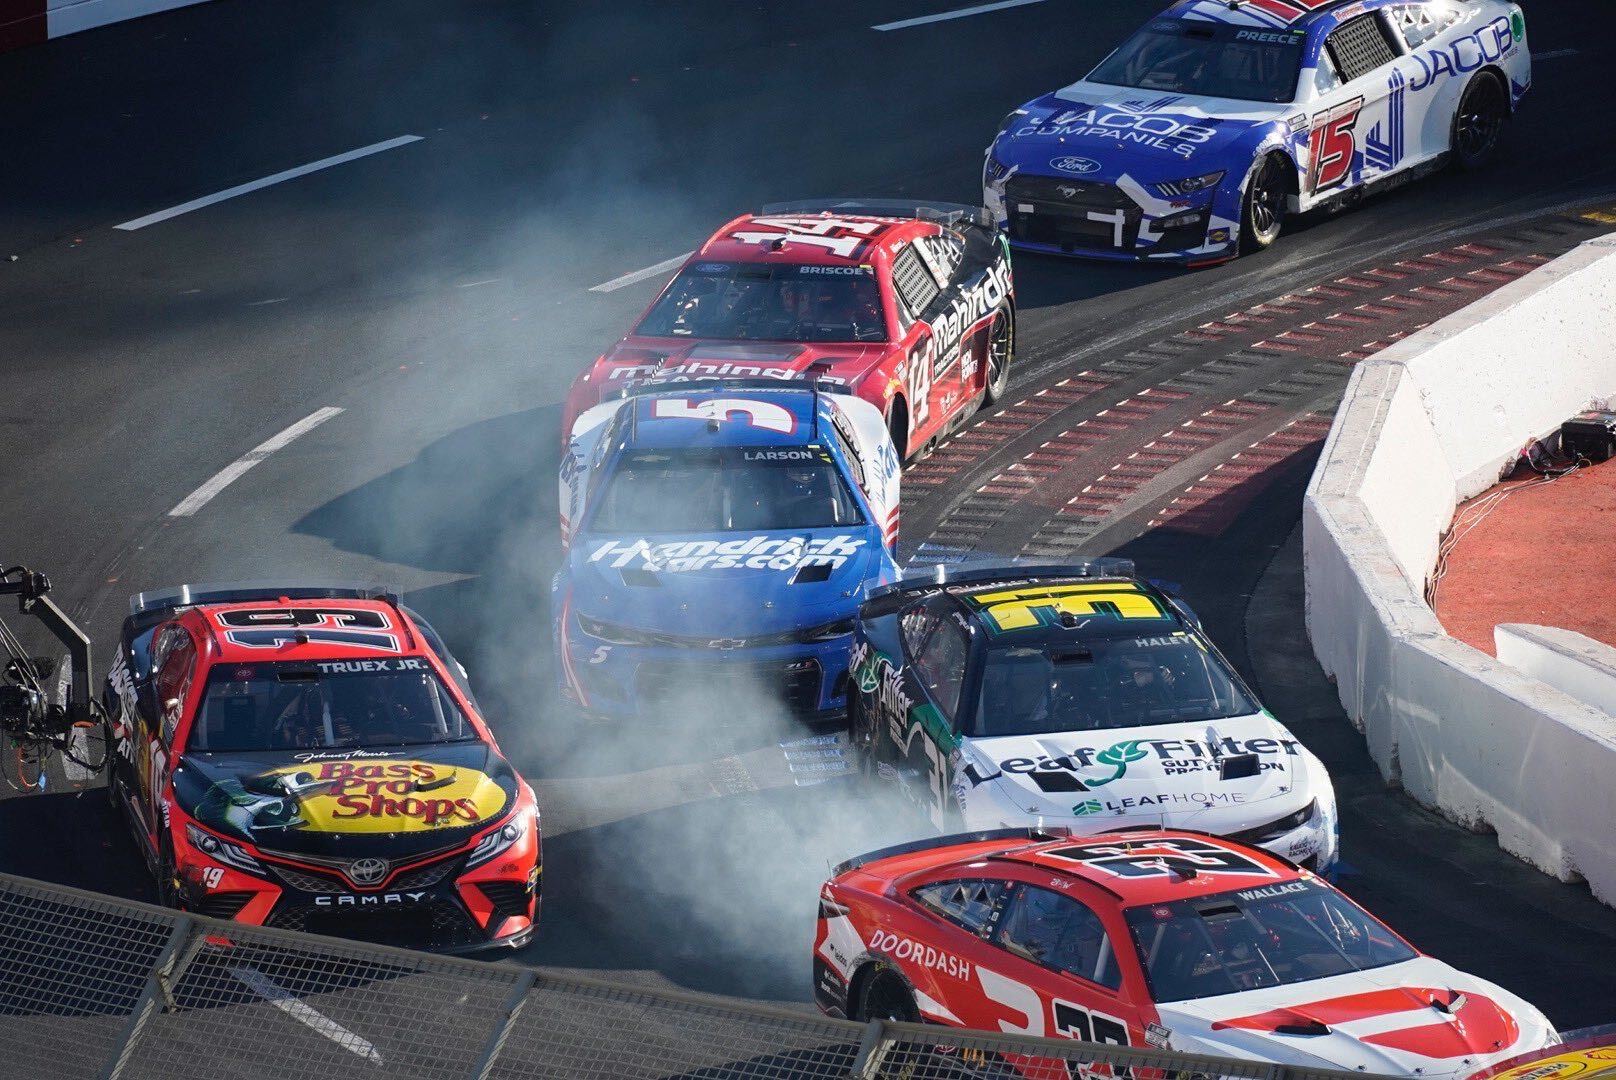 Race cars skid around the track, causing smoke to rise into the air. The racers are in the middle of a turn.